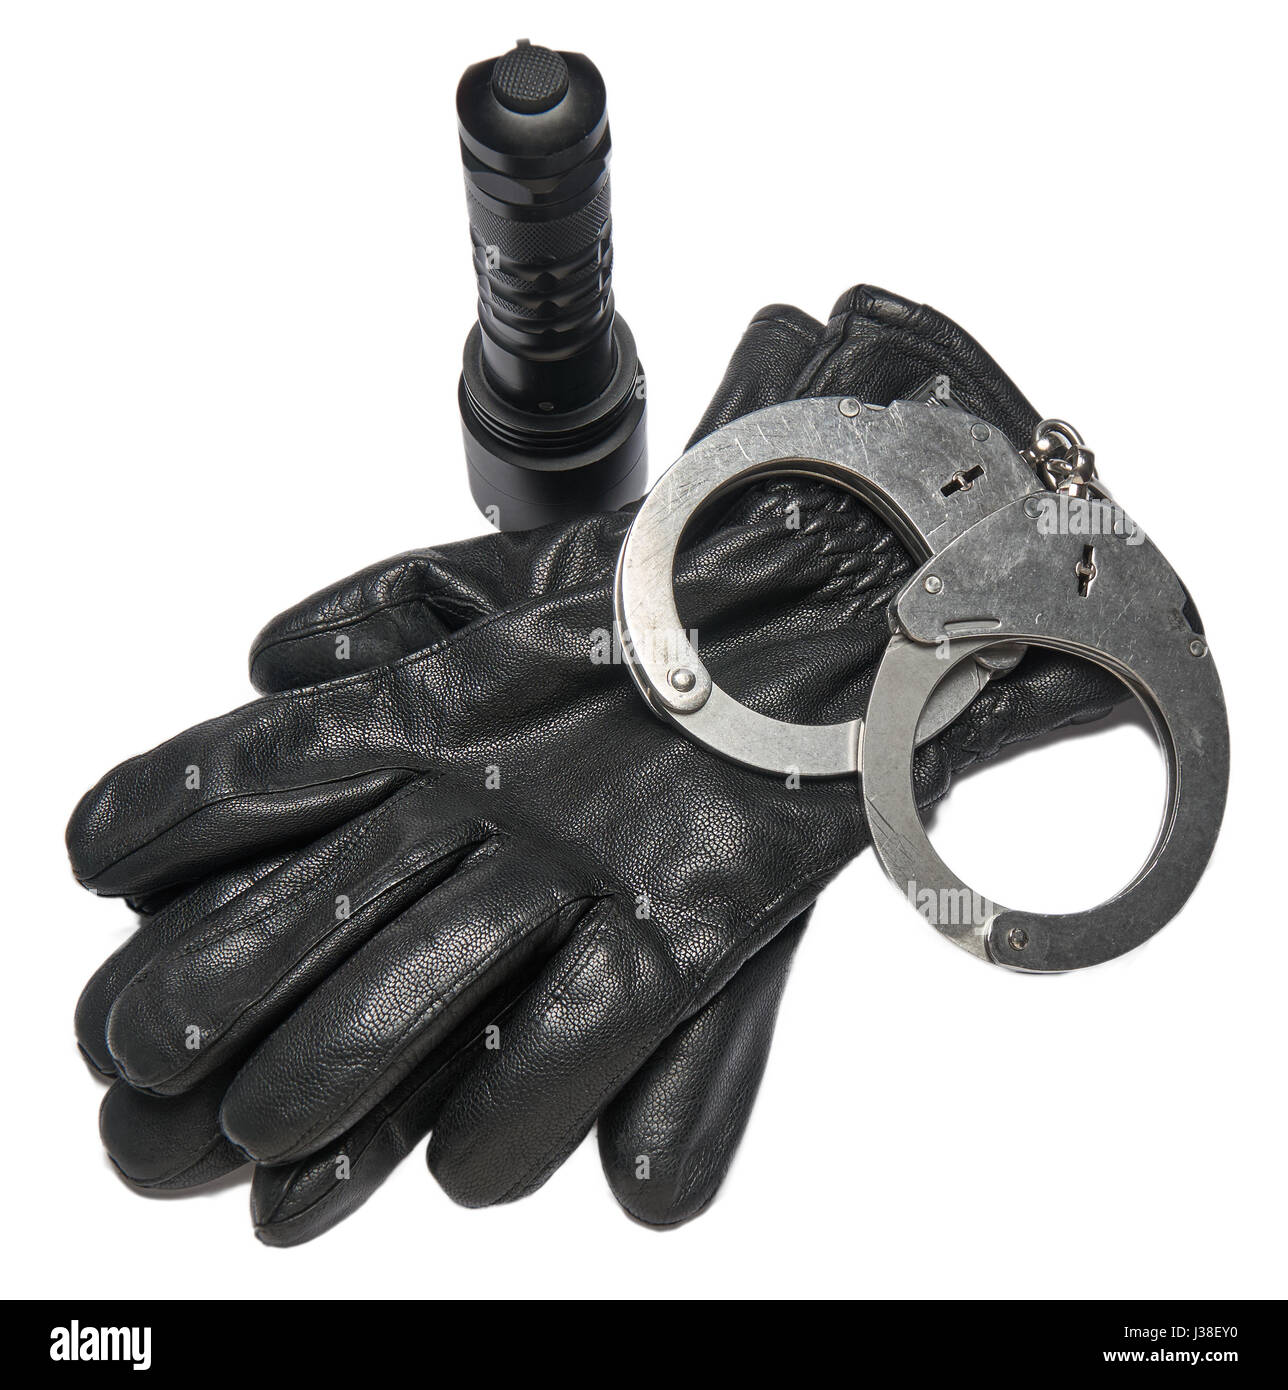 German police handcuffs, leather gloves and a torchlight isolated on white background. Stock Photo